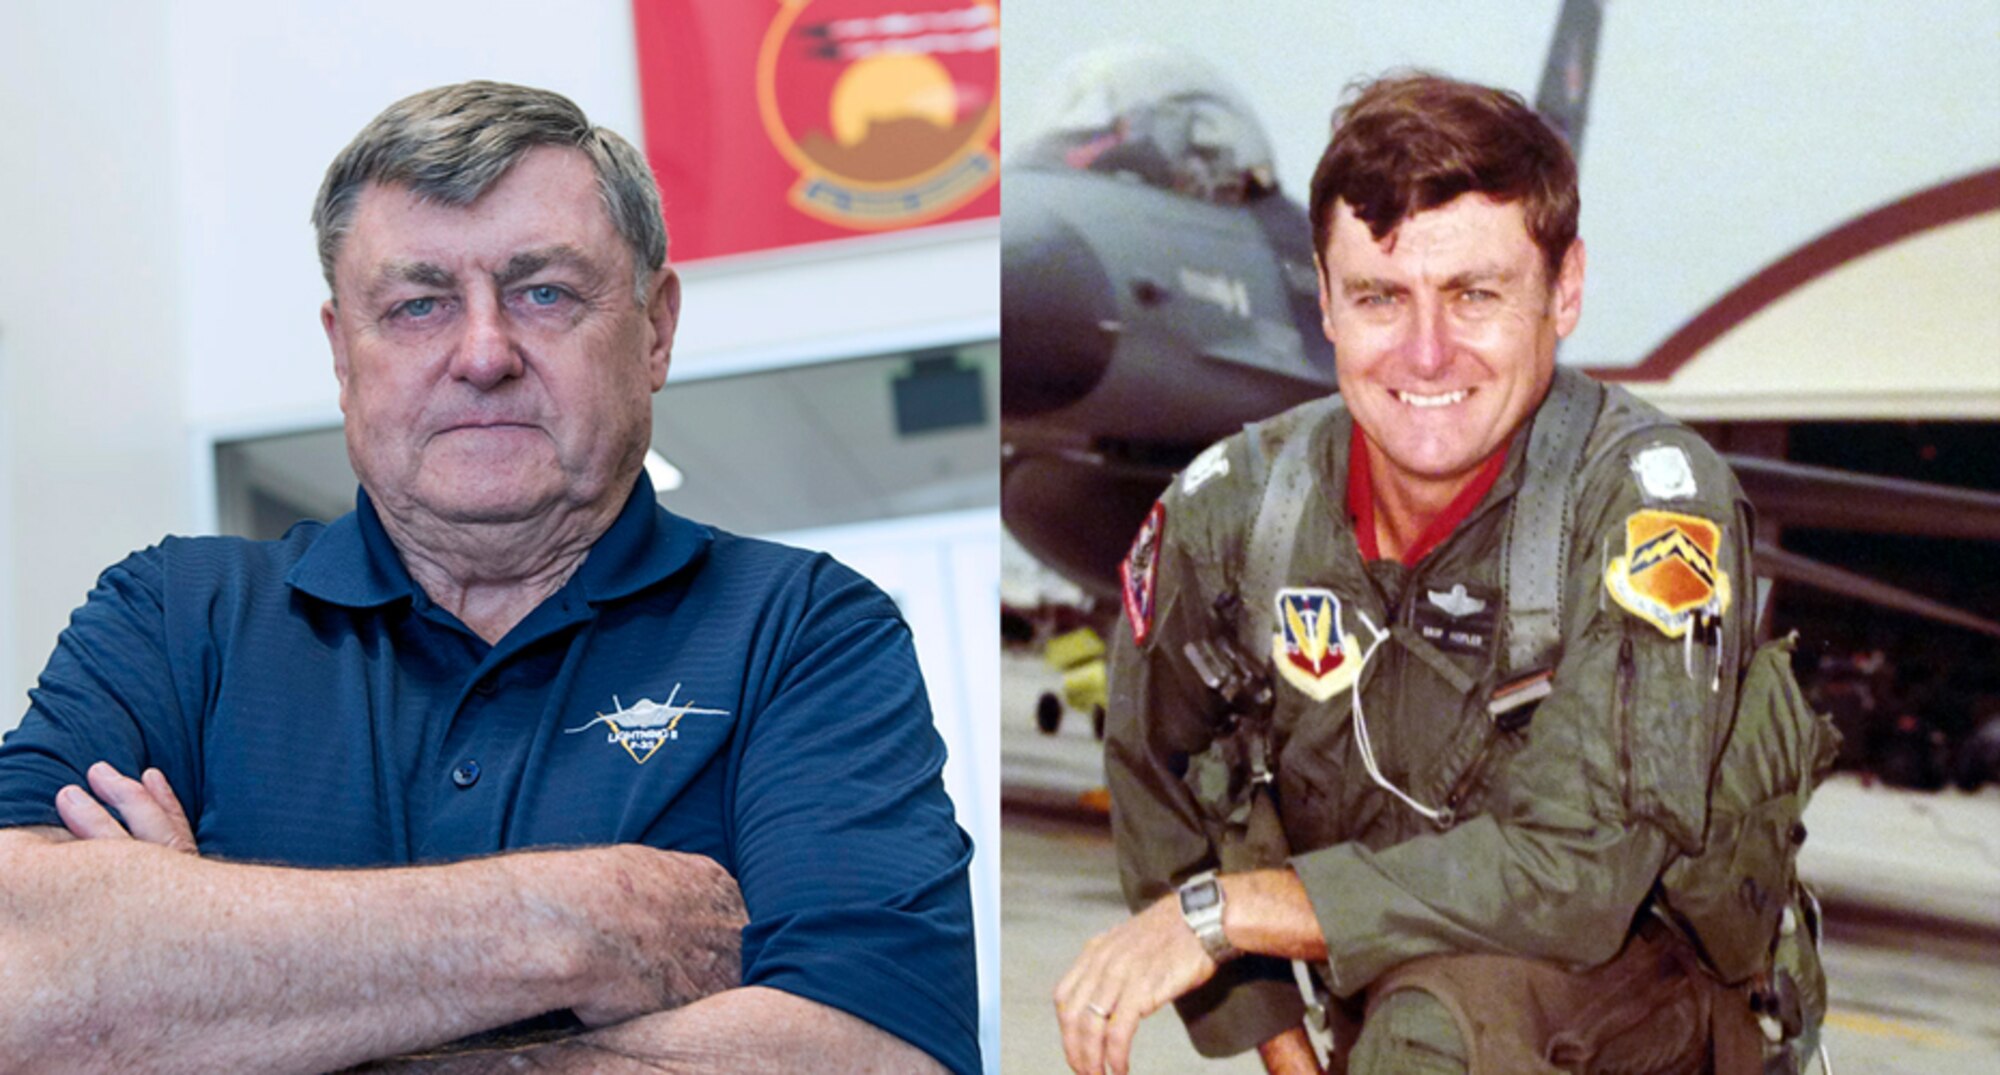 Skip Hopler was one of the first four fighter pilots in Tactical Air Command sent to Hill AFB in Utah in 1978 to set up F-16 training at the 16th Tactical Fighter Training Squadron, the first operational squadron of F-16s. Today, he is responsible for the Lockheed Martin F-35 ground training program for the world’s newest fifth generation fighter.